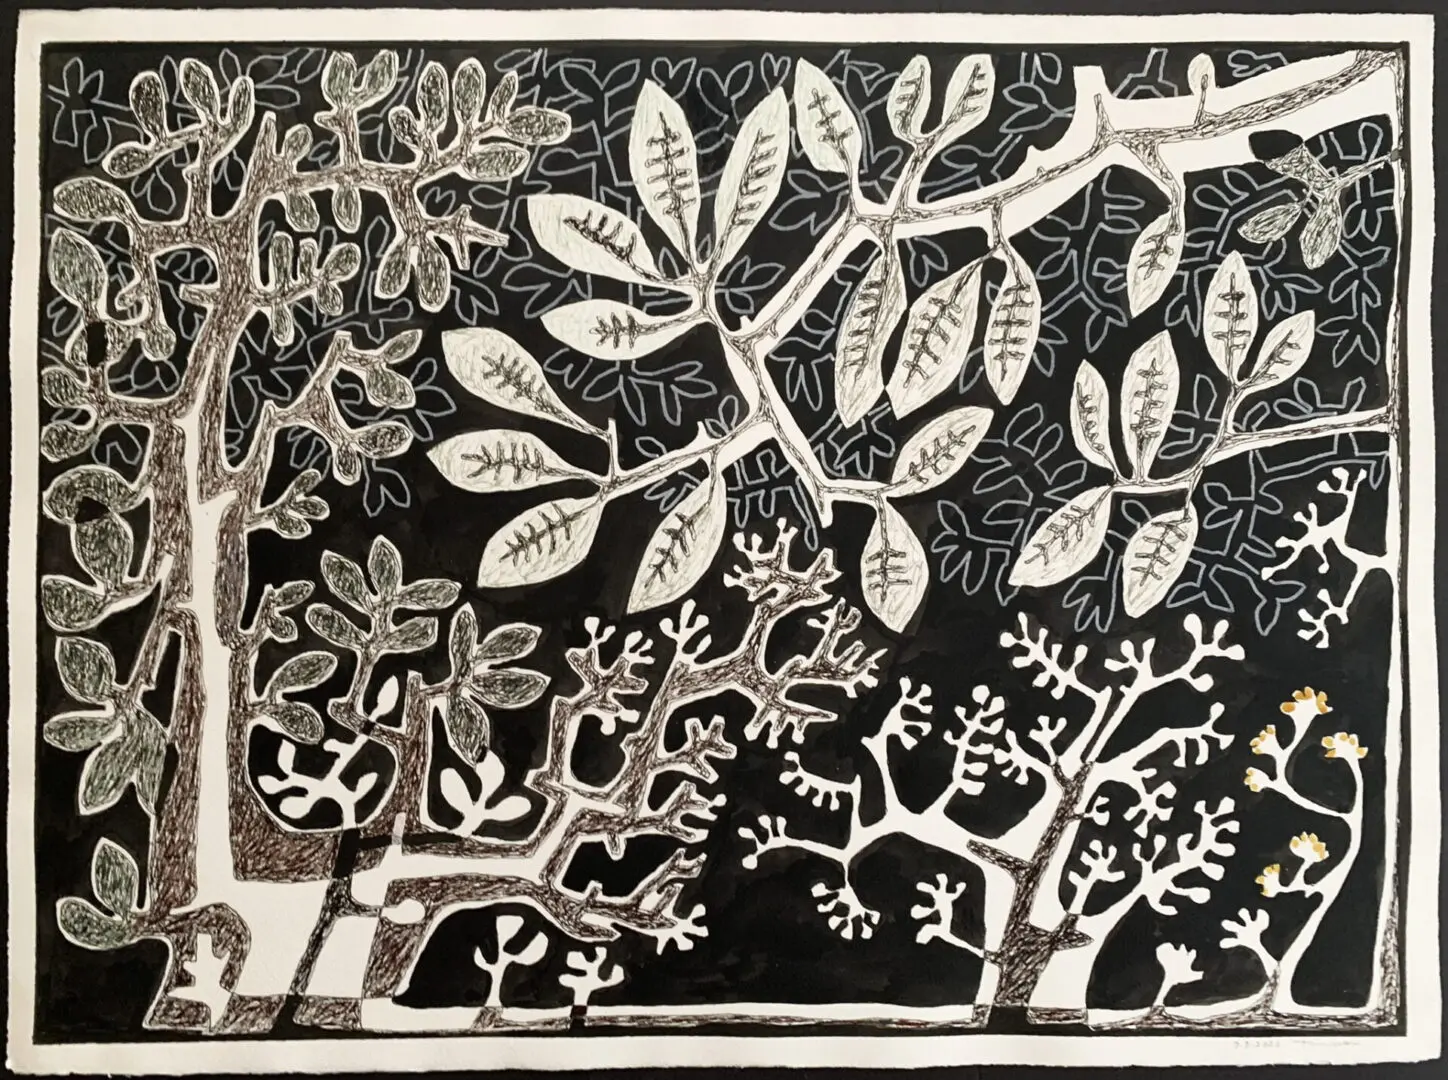 A black and white painting of trees with leaves.